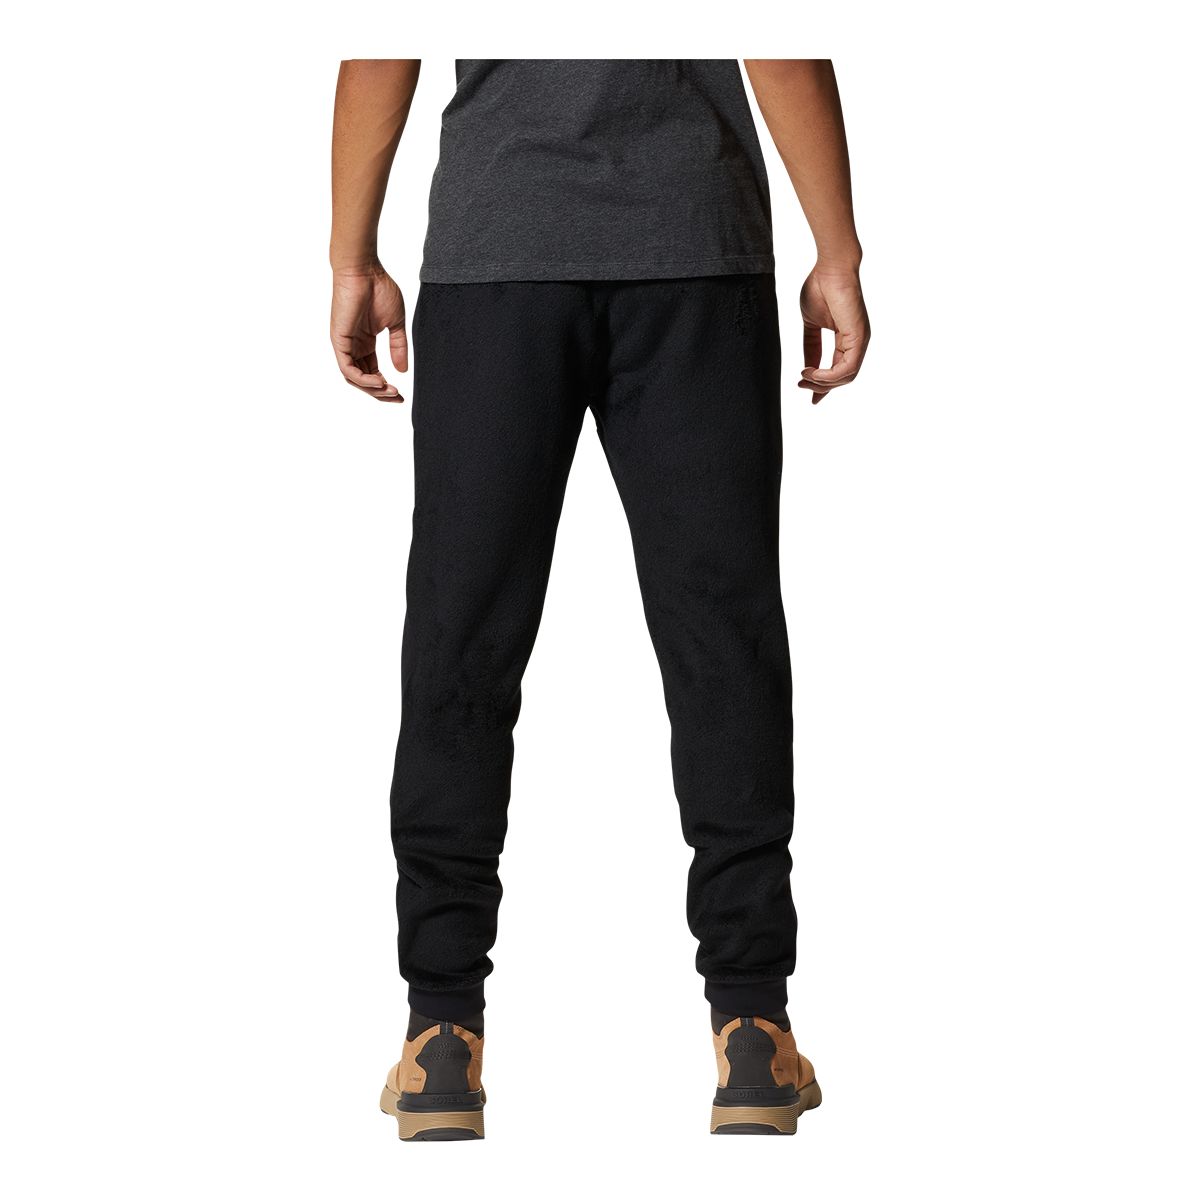 https://media-www.atmosphere.ca/product/div-03-softgoods/dpt-72-casual-clothing/sdpt-01-mens/334215150/mhw-m-polartec-high-loft-pant-923-black-45ec5068-79e0-4009-8510-0342b39a3963-jpgrendition.jpg?imdensity=1&imwidth=1244&impolicy=mZoom